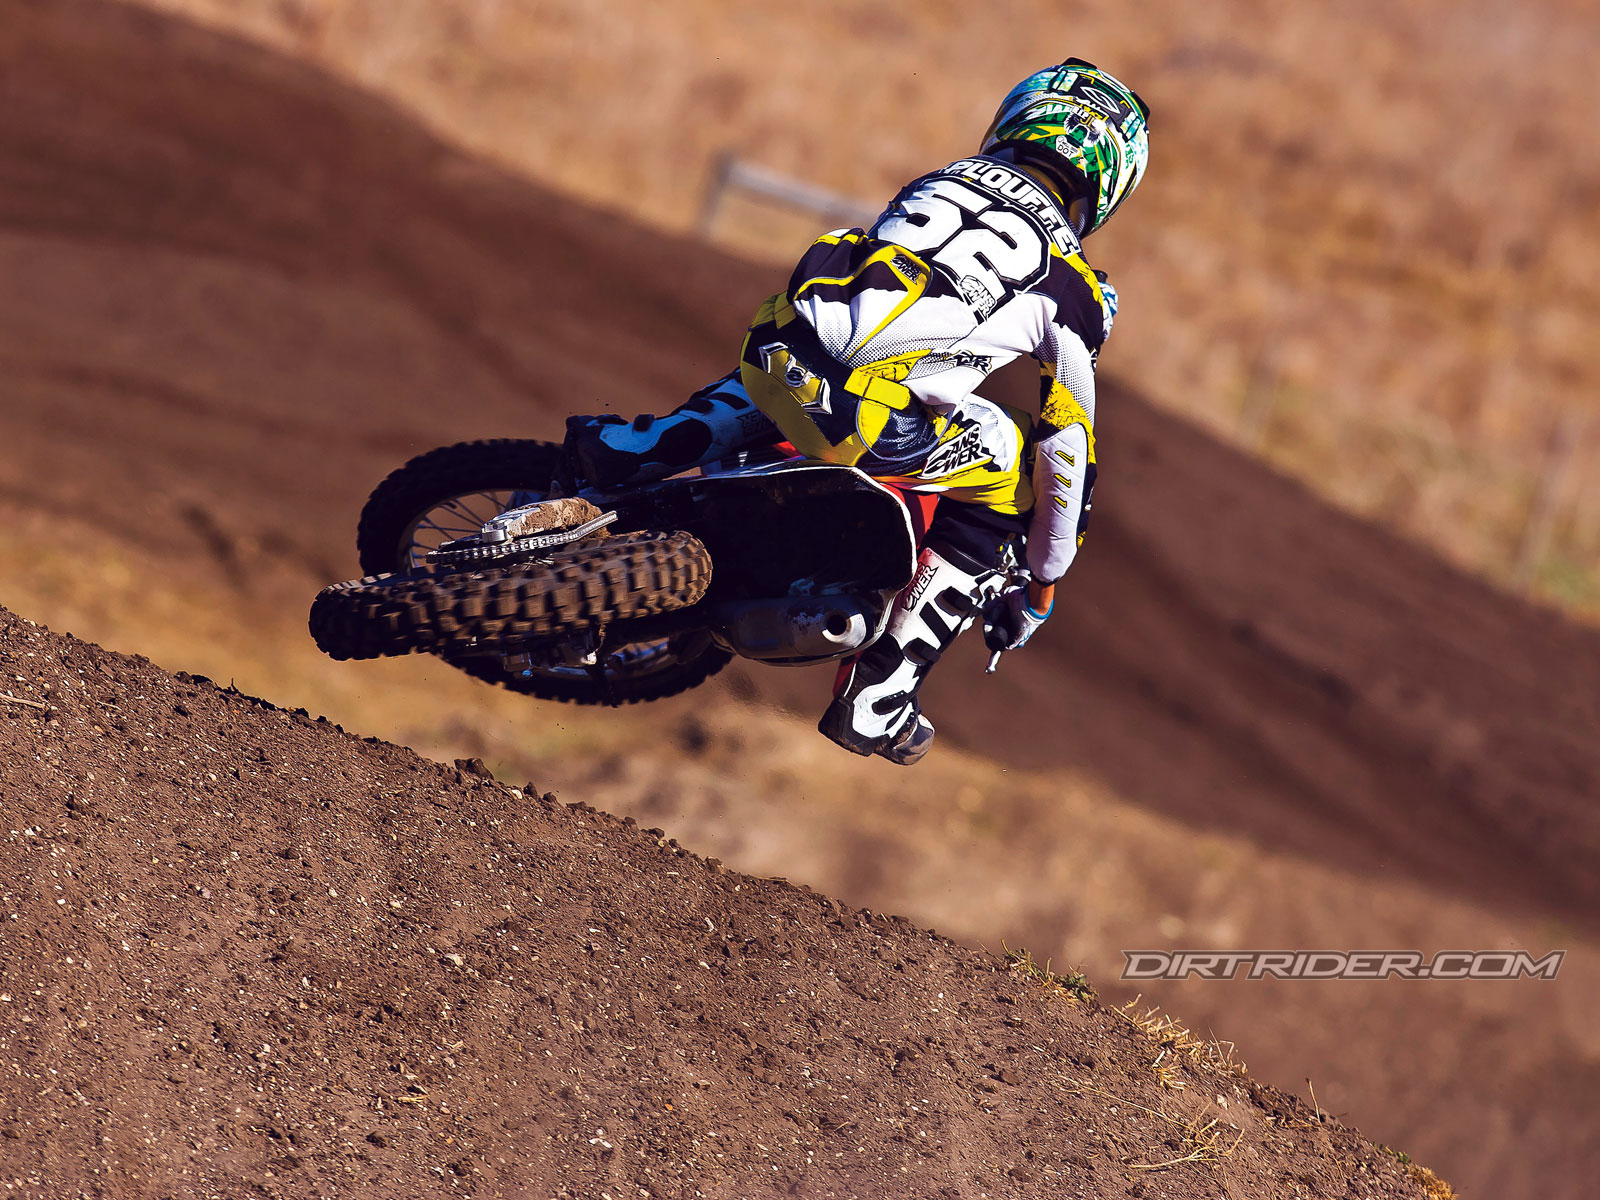 Dirt bike wallpapers Clickandseeworld is all about FunnyAmazing